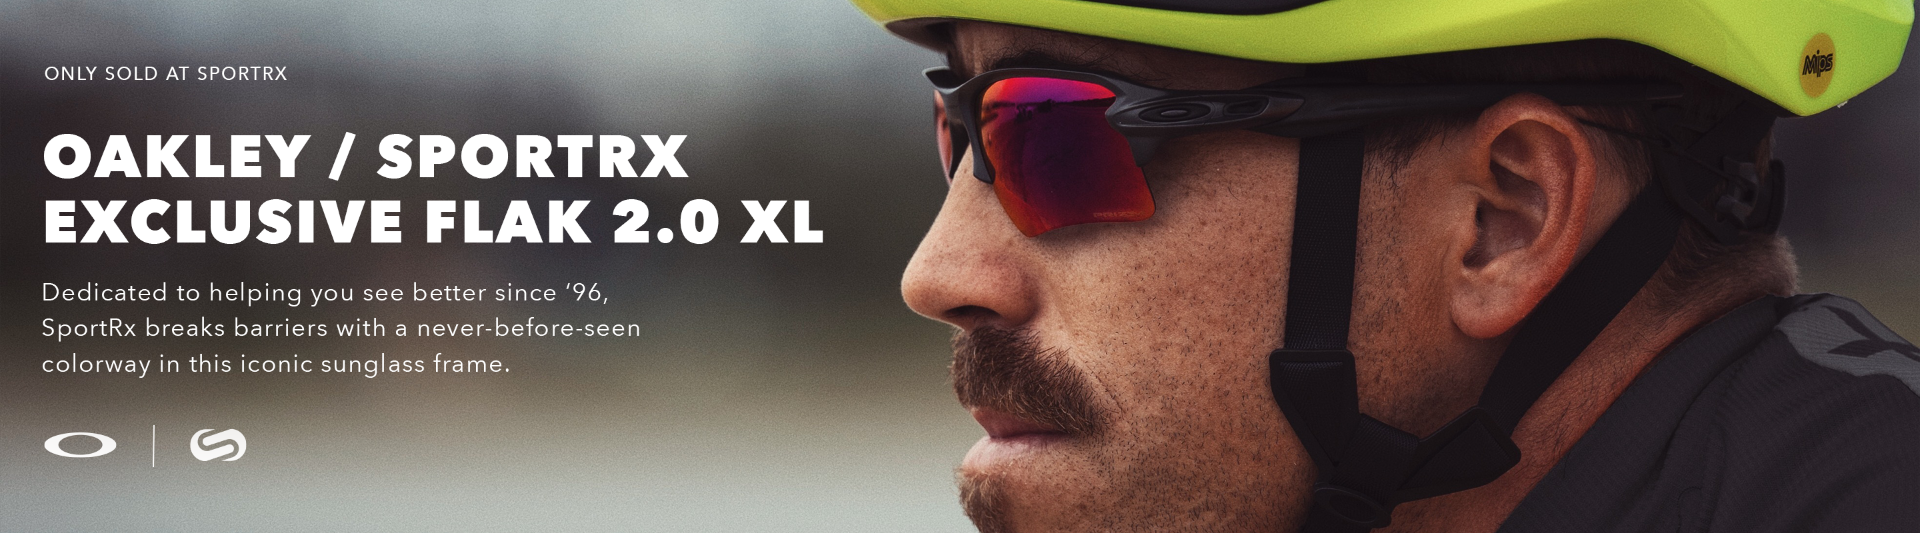 Torrent Mos bijvoeglijk naamwoord Where to Buy Oakley Sunglasses | Who and Why | SportRx